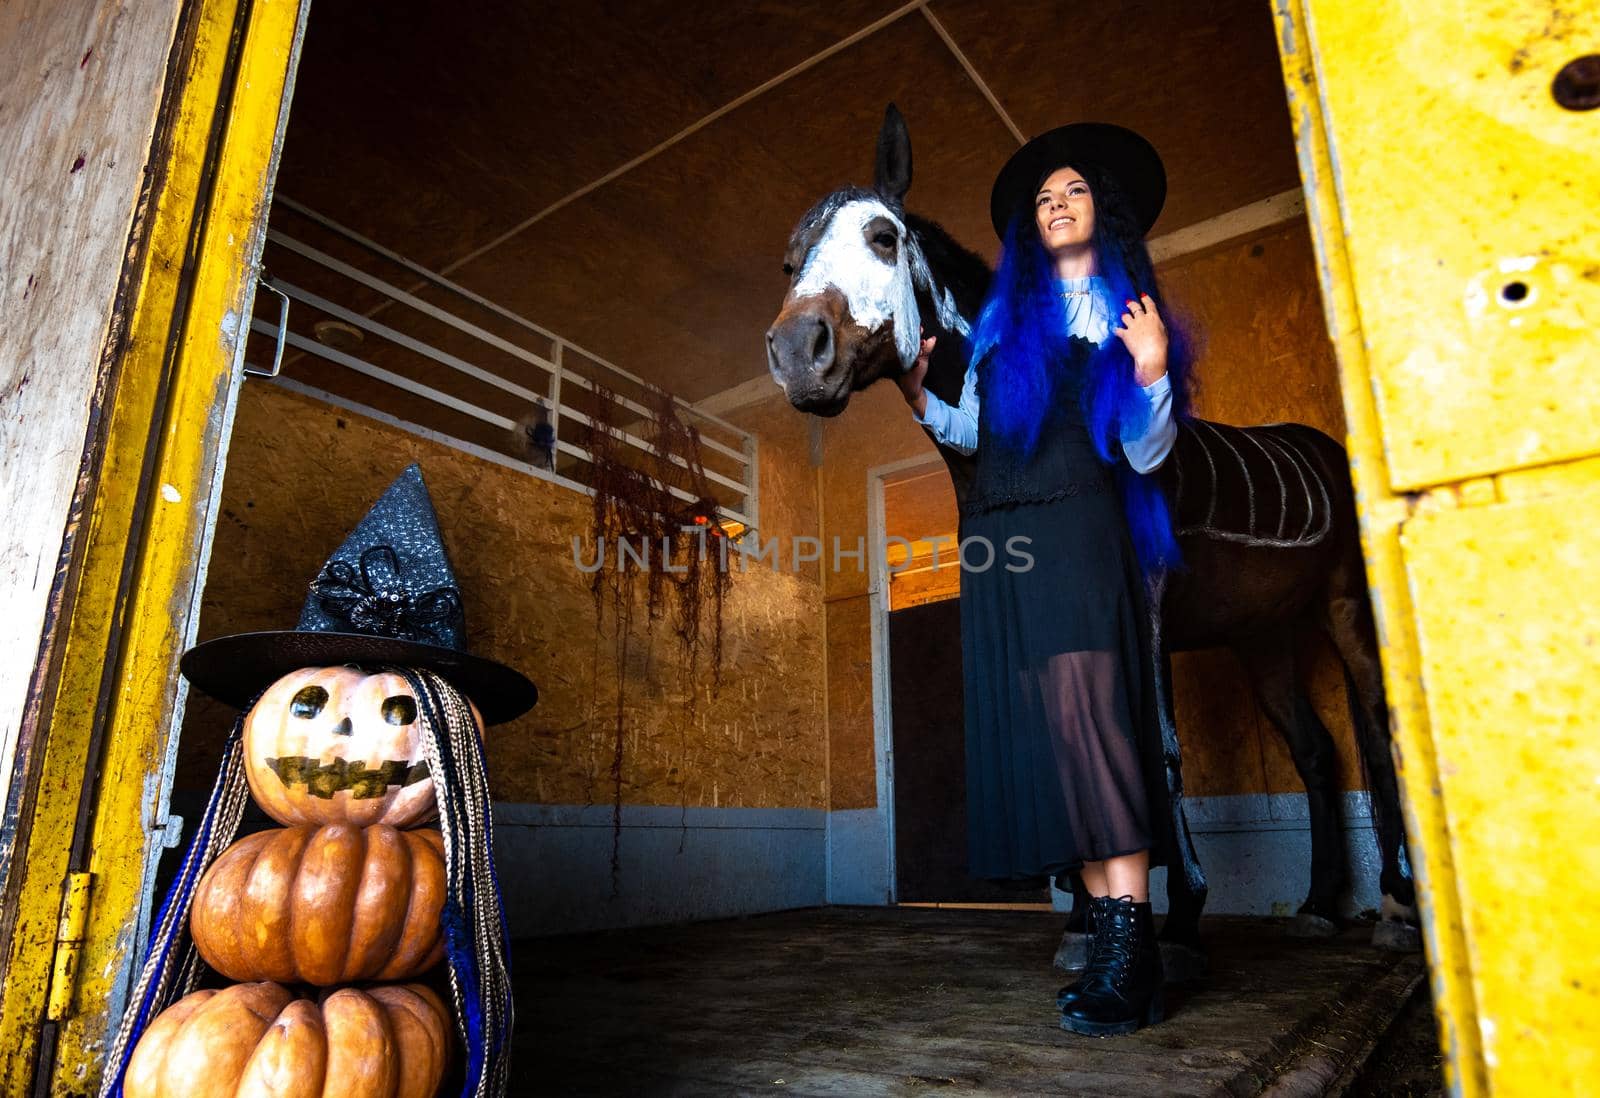 A girl dressed as a witch comes out of the corral with a horse, in the foreground an evil figure of pumpkins by Madhourse